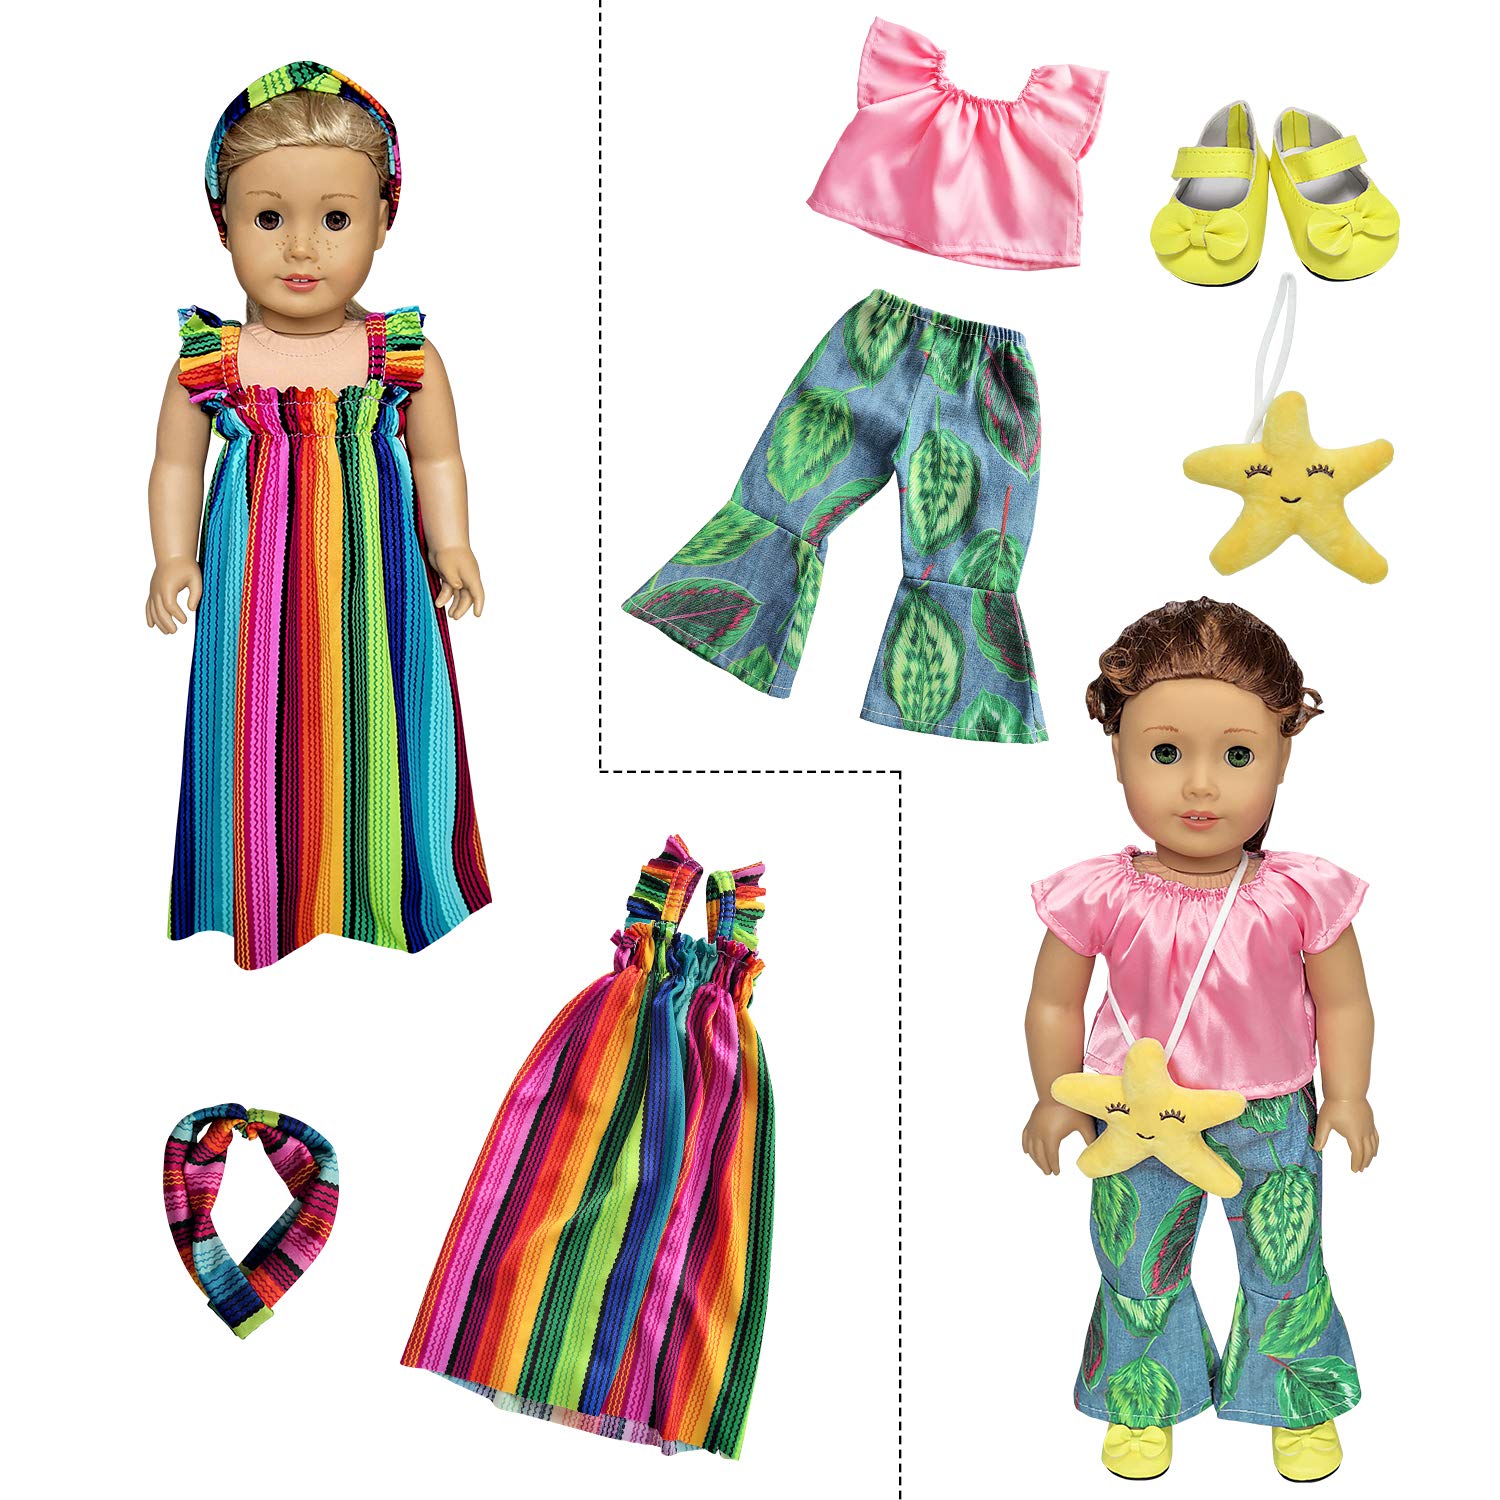 WYHTOYS 18 Inch Doll Clothes, American Doll Clothes and Accessories Gift for Girl - Including 7 Set Toys Doll Clothing Outfits, 2 Pairs Shoes, 2 Pcs Doll Backpack Bags